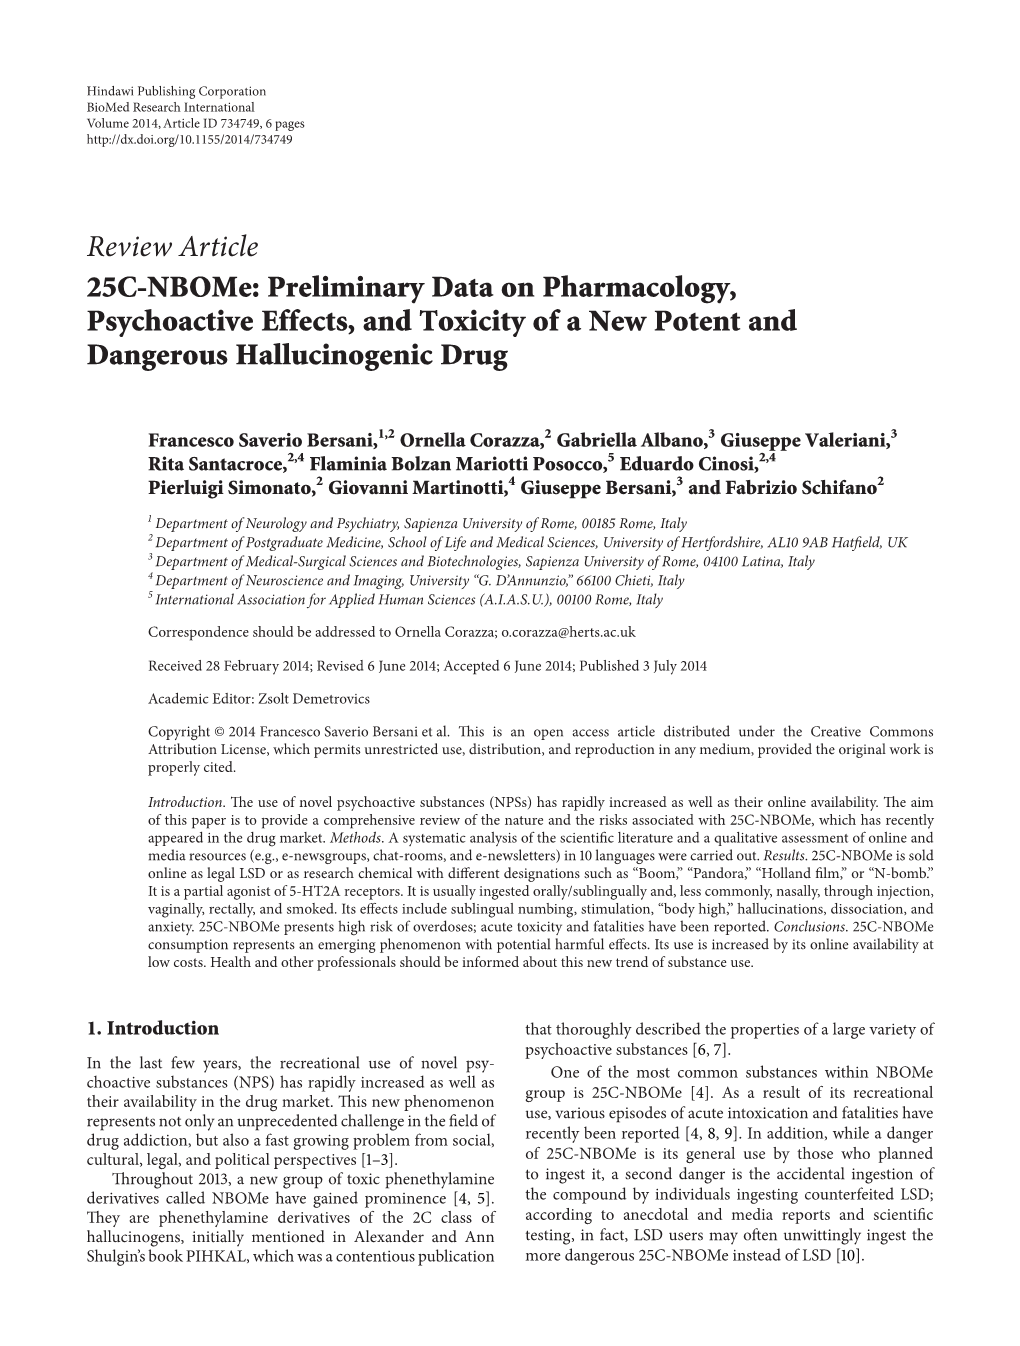 25C-Nbome: Preliminary Data on Pharmacology, Psychoactive Effects, and Toxicity of a New Potent and Dangerous Hallucinogenic Drug